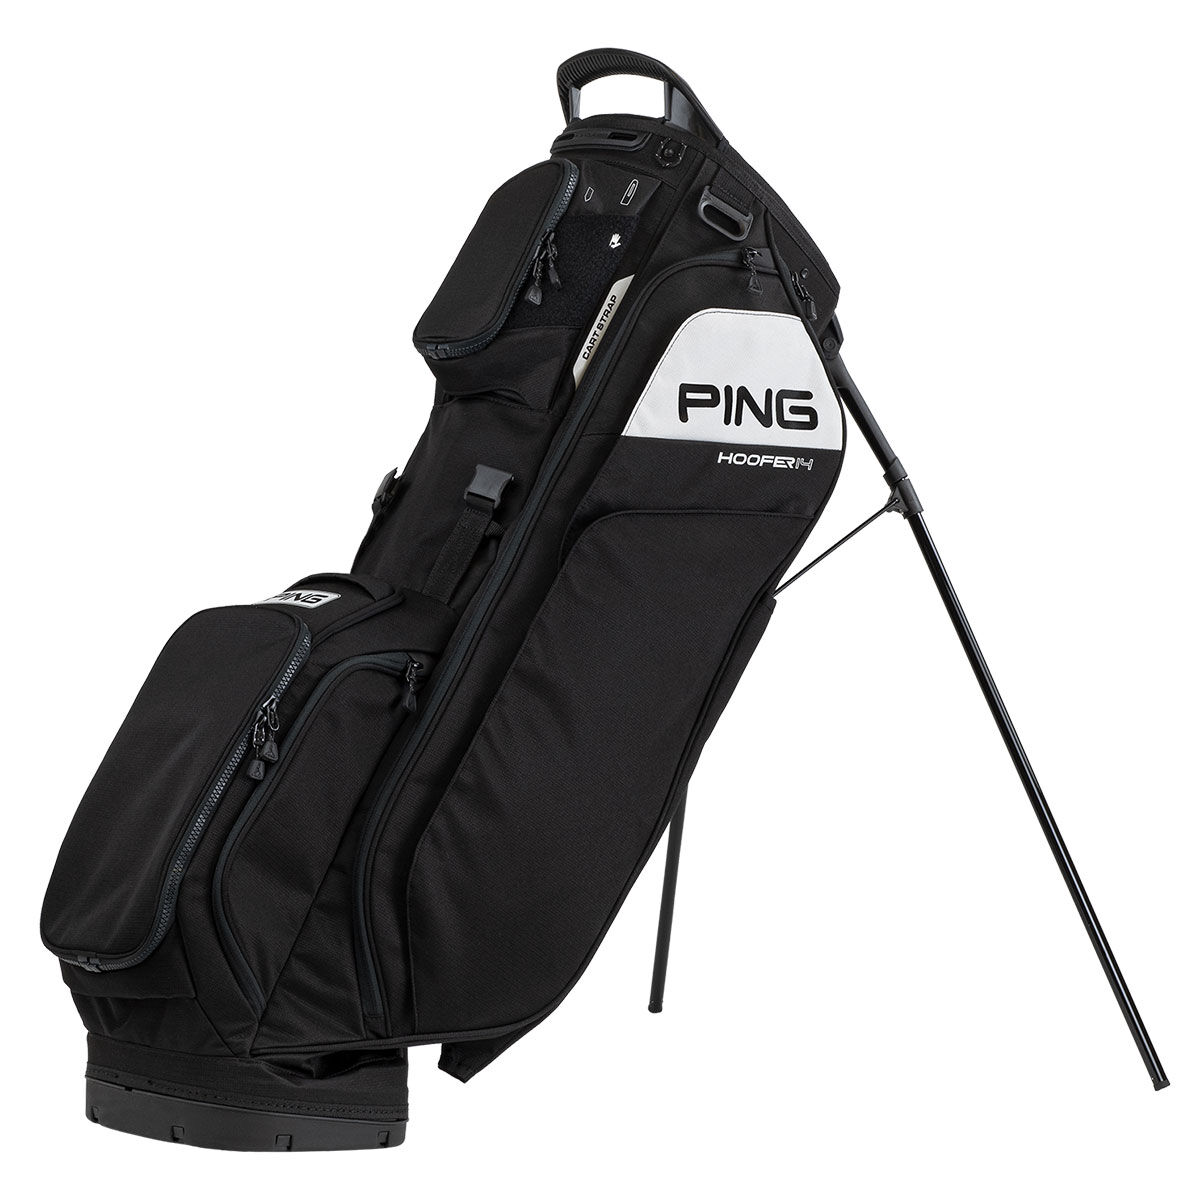 PING Hoofer 14 231 Golf Stand Bag, Black, One Size | American Golf